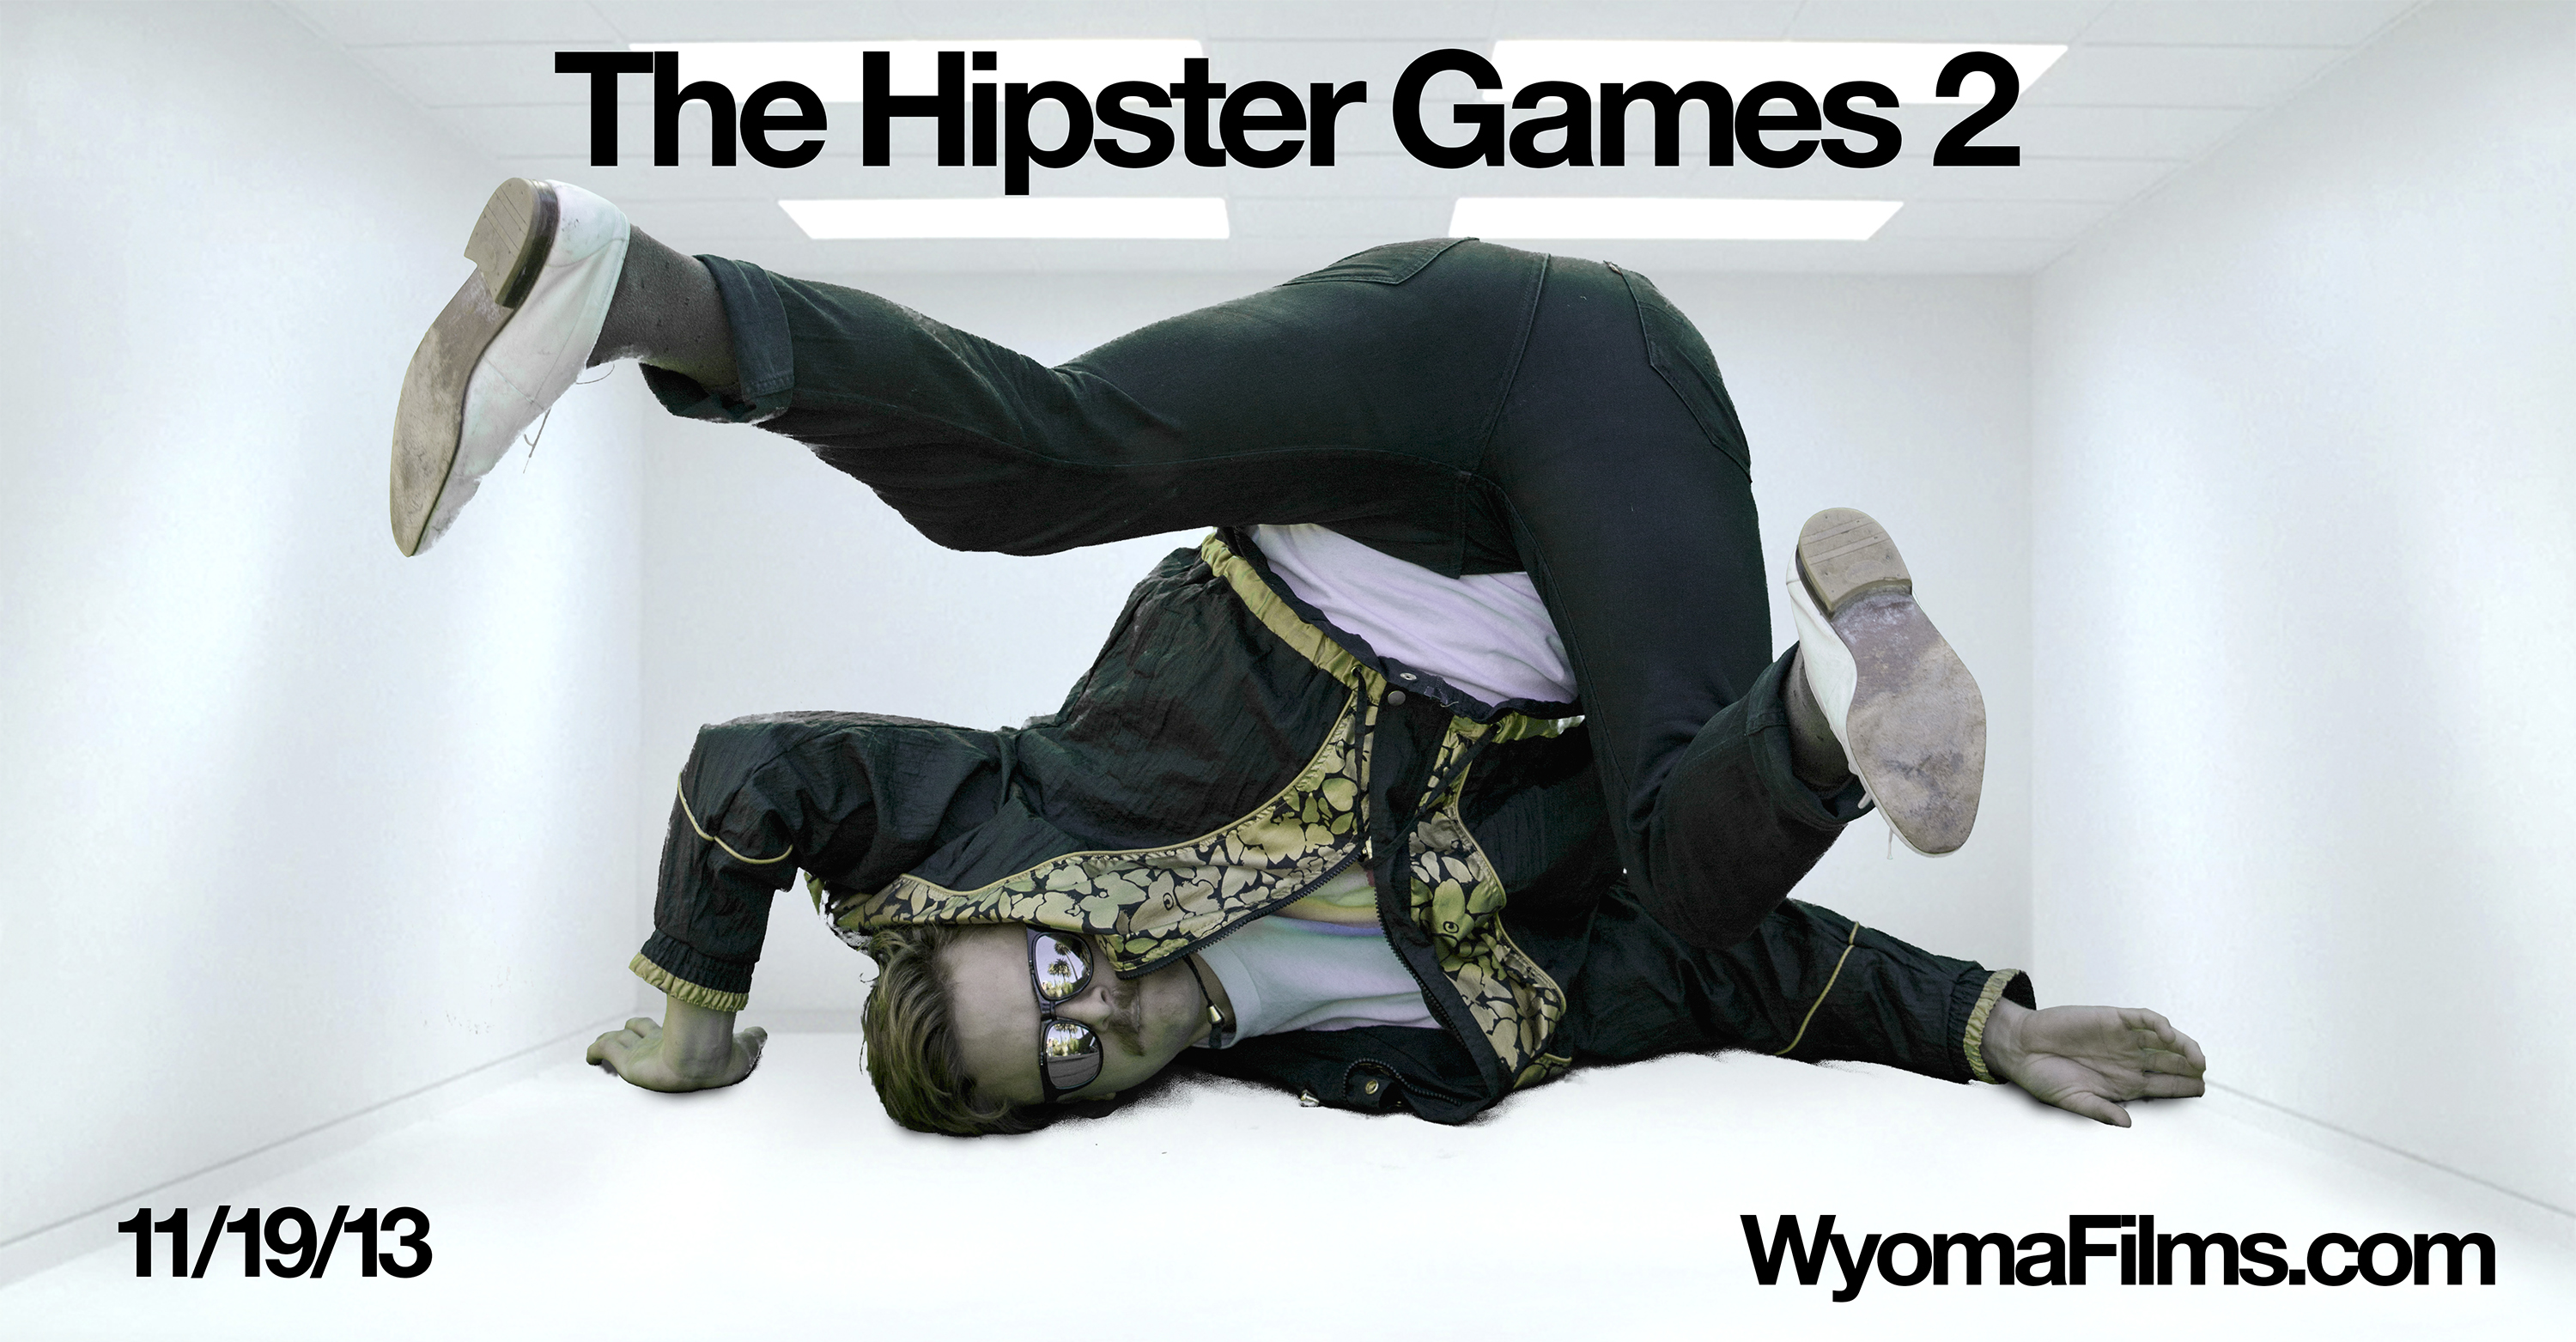 Hipster Games: Blowing Smoke - American Hipster